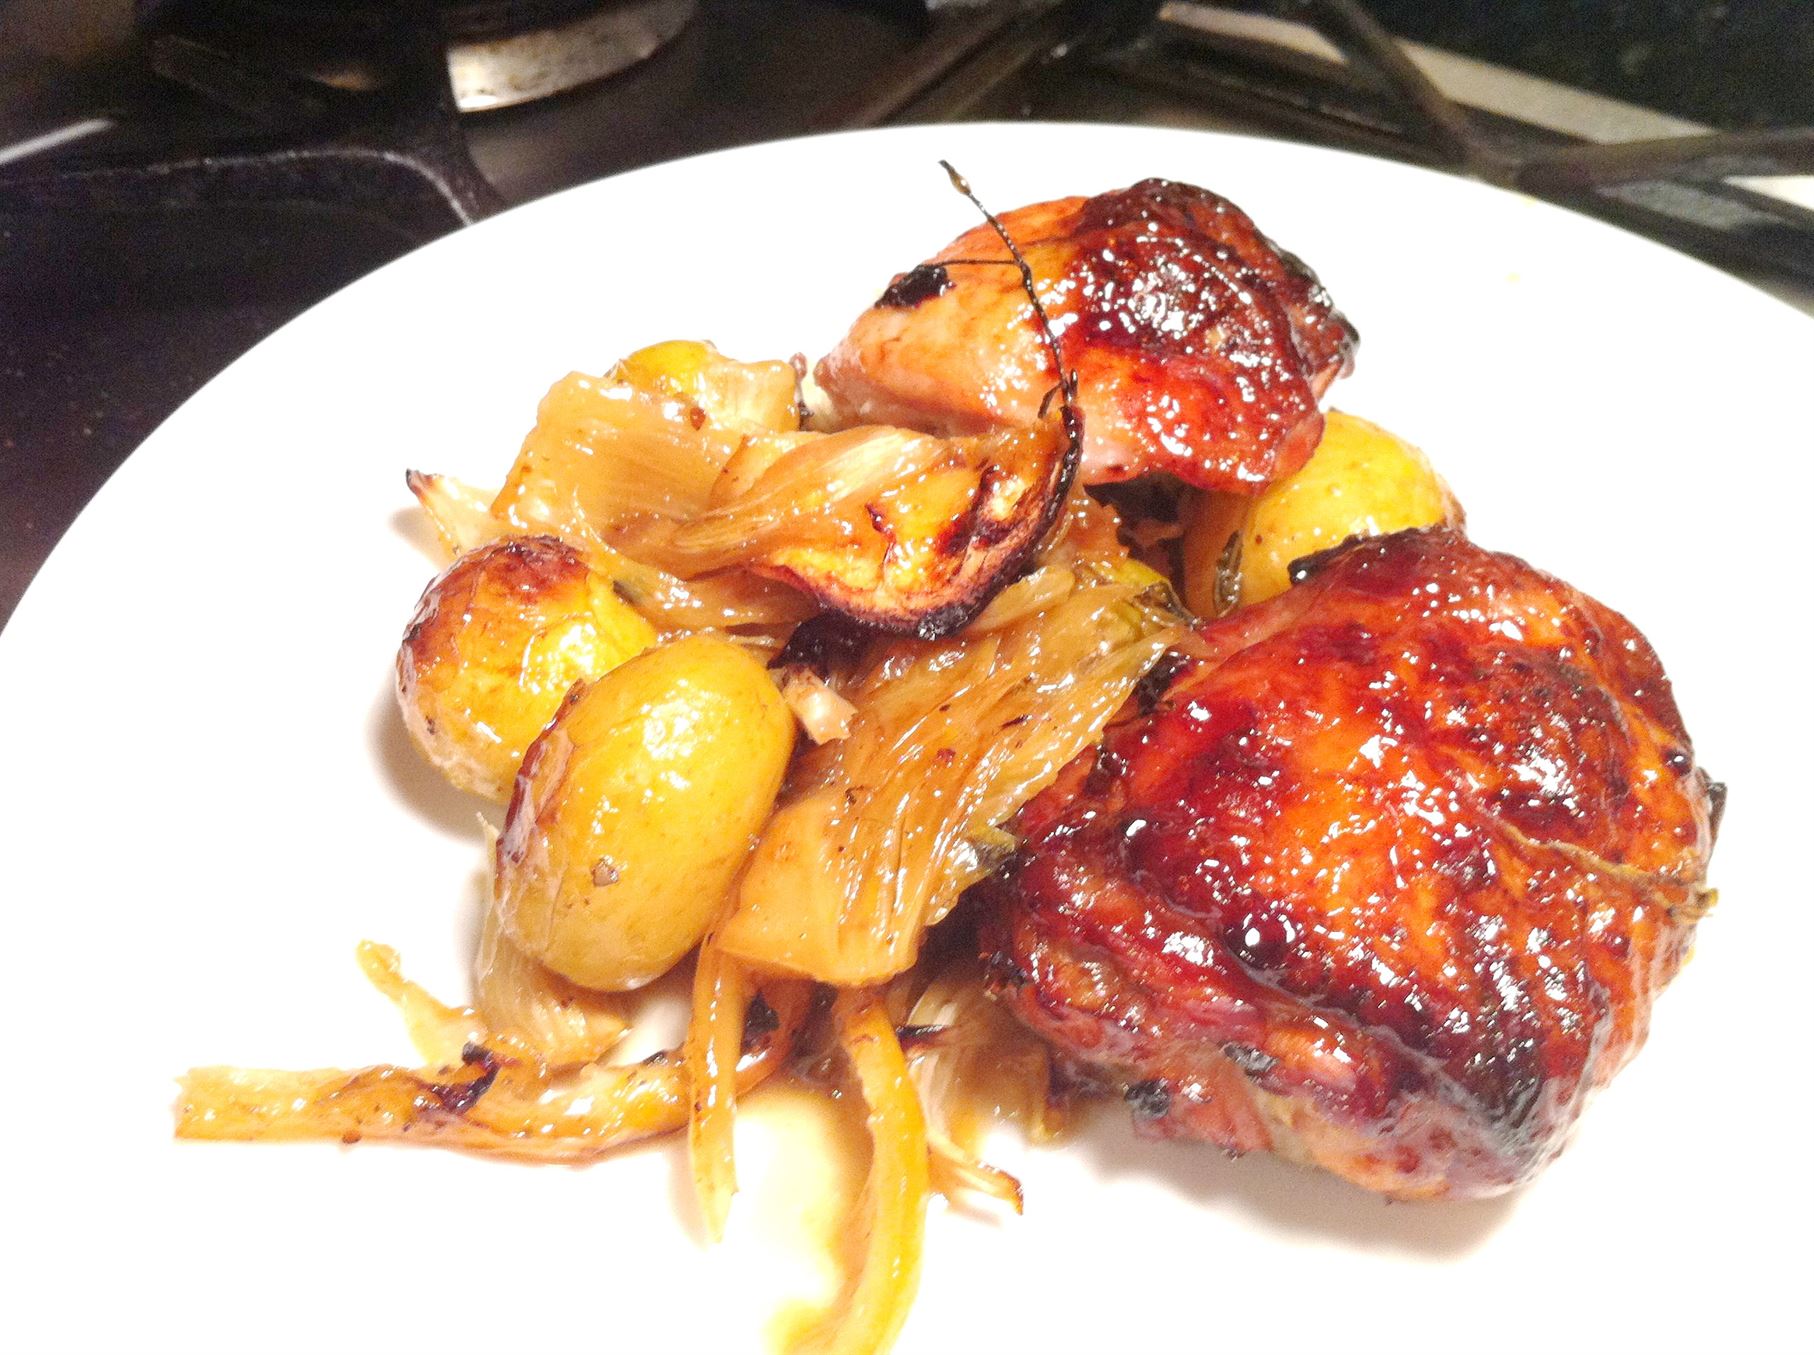 Monica Galettis Organic Roast Chicken Thighs with Fennel and Lemon, Lay The Table